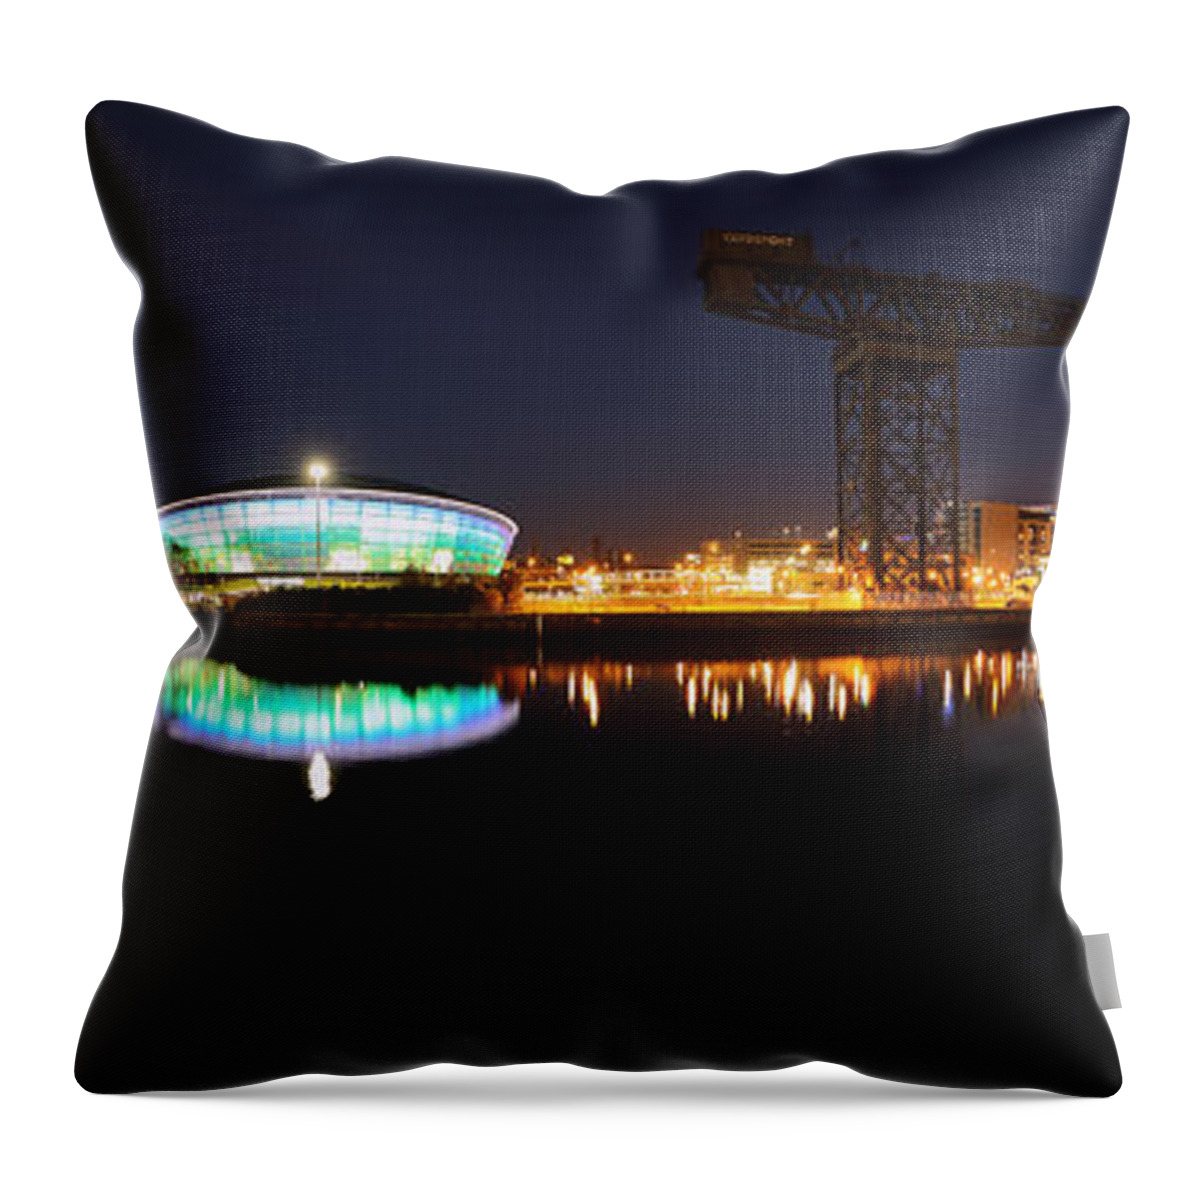  Clyde Arc Throw Pillow featuring the photograph Glasgow Clyde Panorama by Grant Glendinning